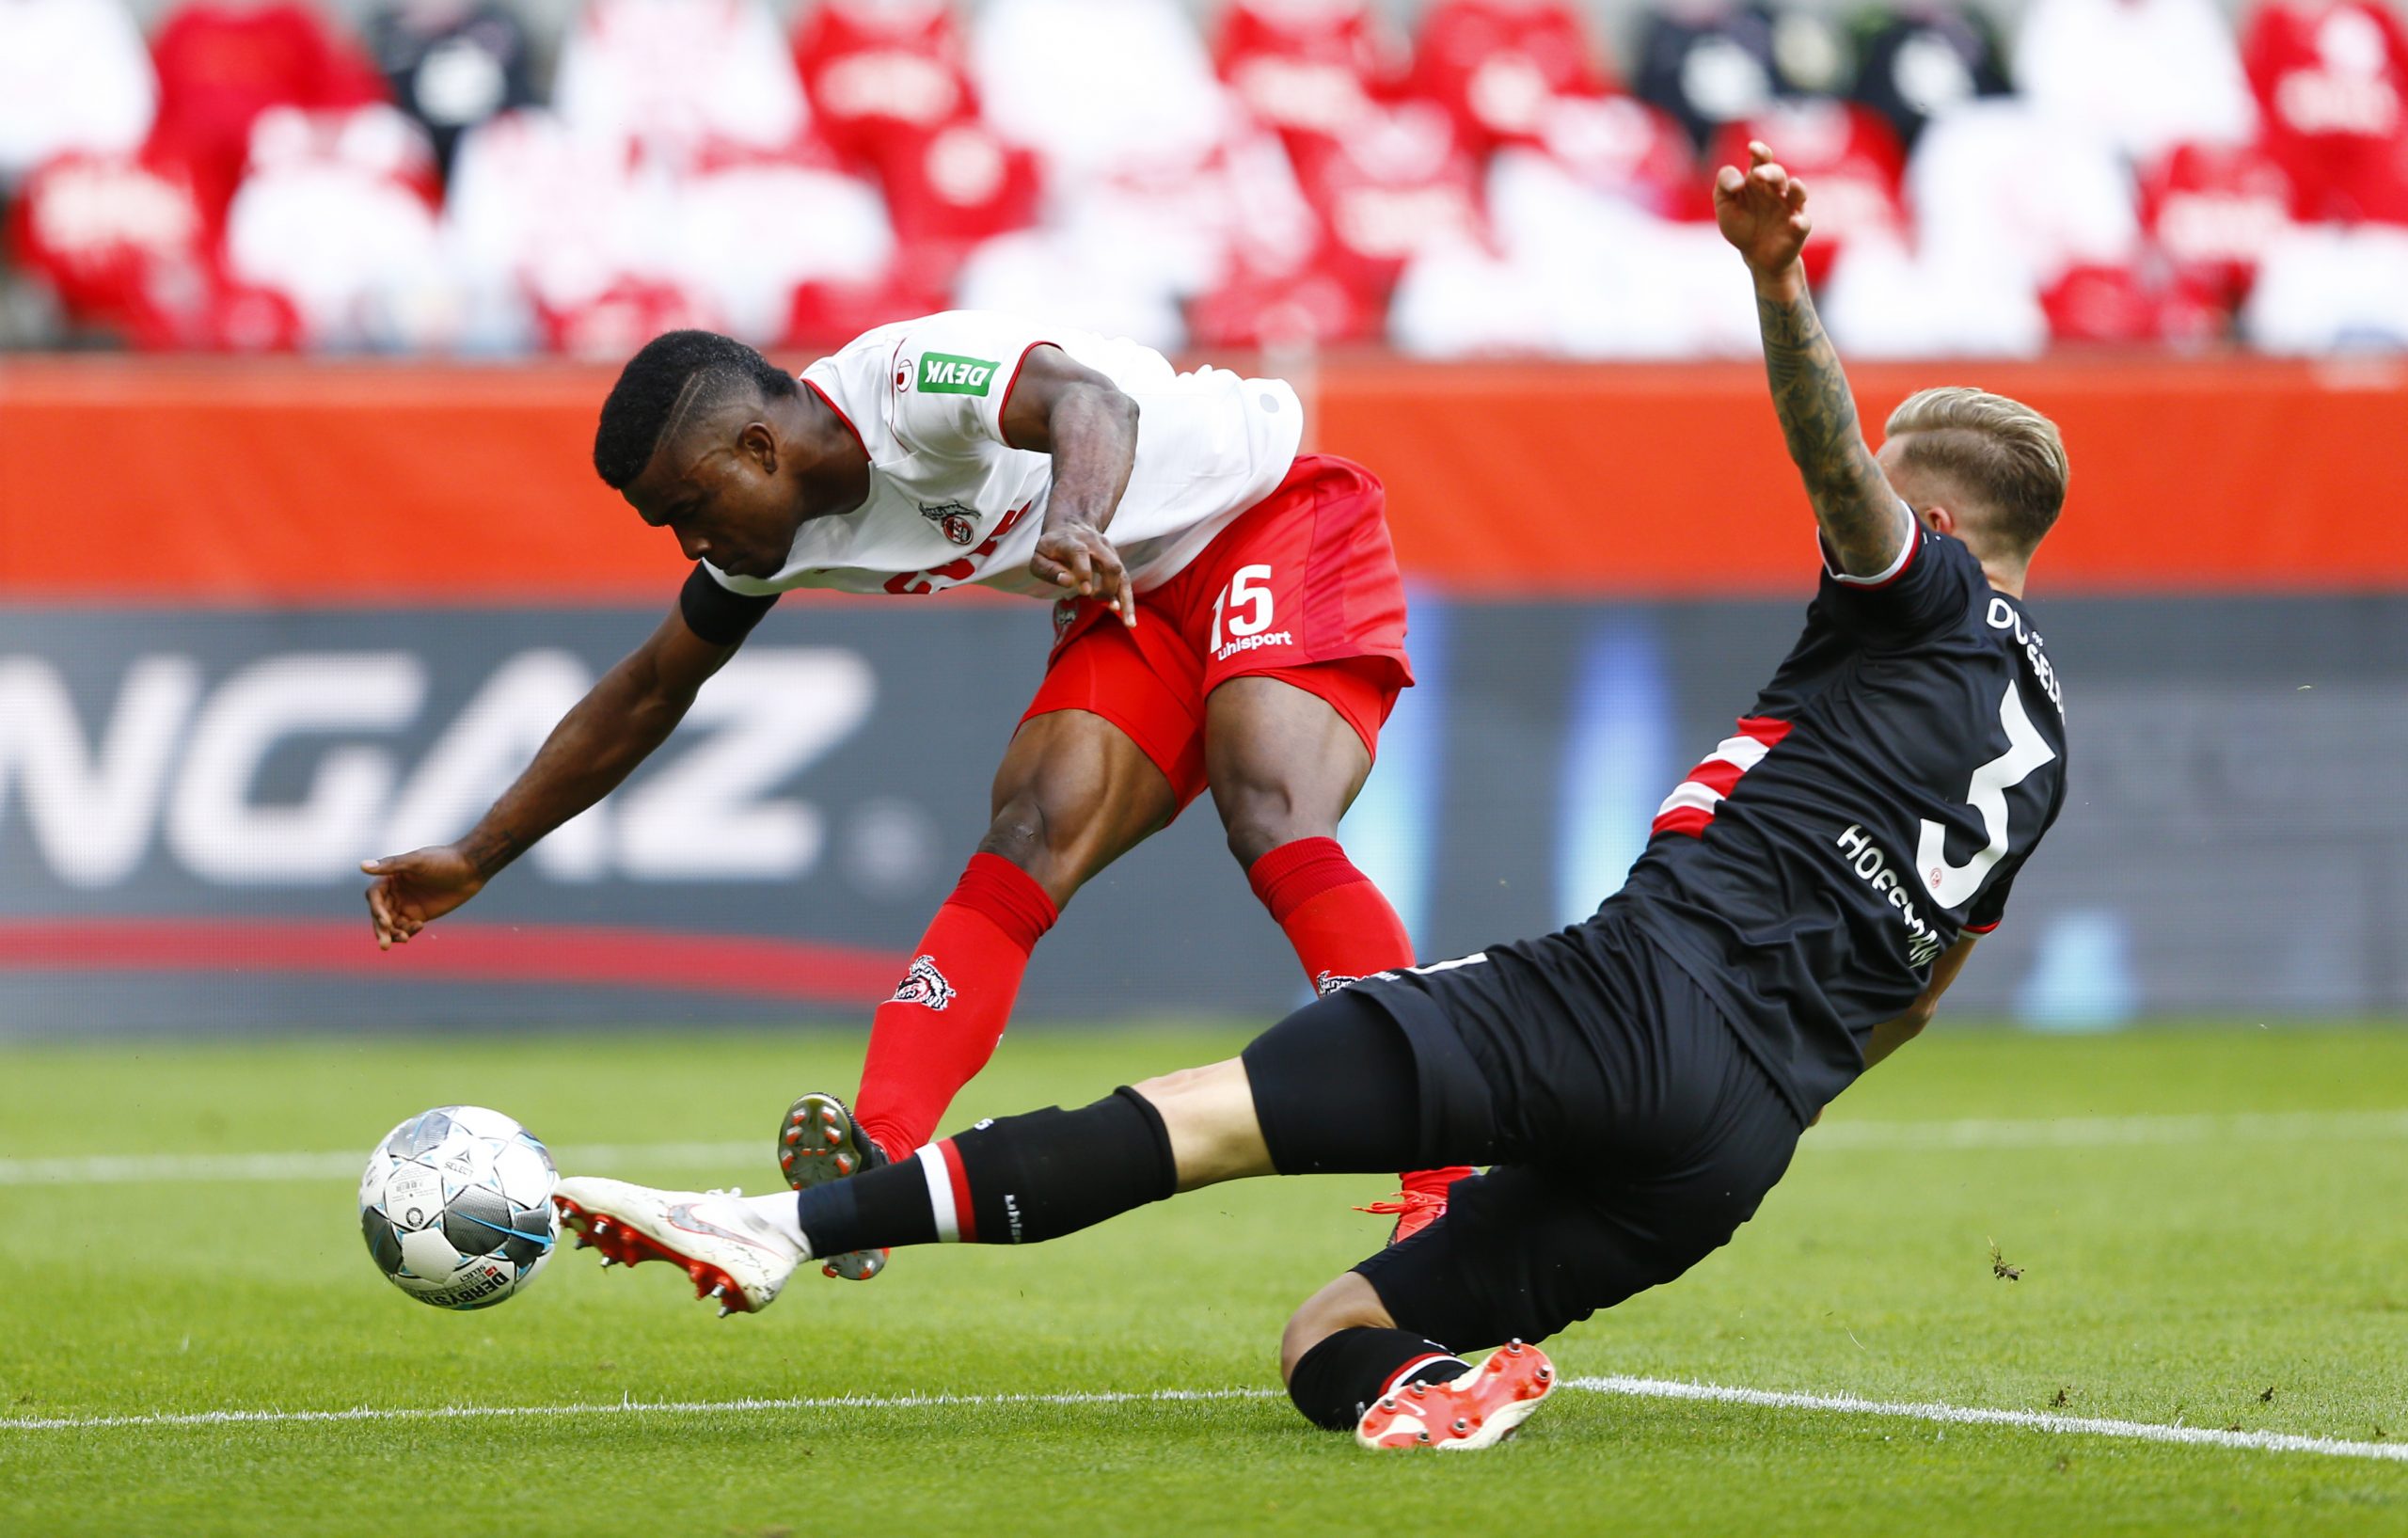 epa08441721 FC Cologne's Jhon Cordoba (L) in action with Fortuna Dusseldorf's Andre Hoffmann during the German Bundesliga soccer match between FC Cologne and Fortuna Dusseldorf in Cologne, Germany, 24 May 2020, as play resumes behind closed doors following the outbreak of the coronavirus disease (COVID-19).  EPA/THILO SCHMUELGEN / POOL DFL regulations prohibit any use of photographs as image sequences and/or quasi-video.